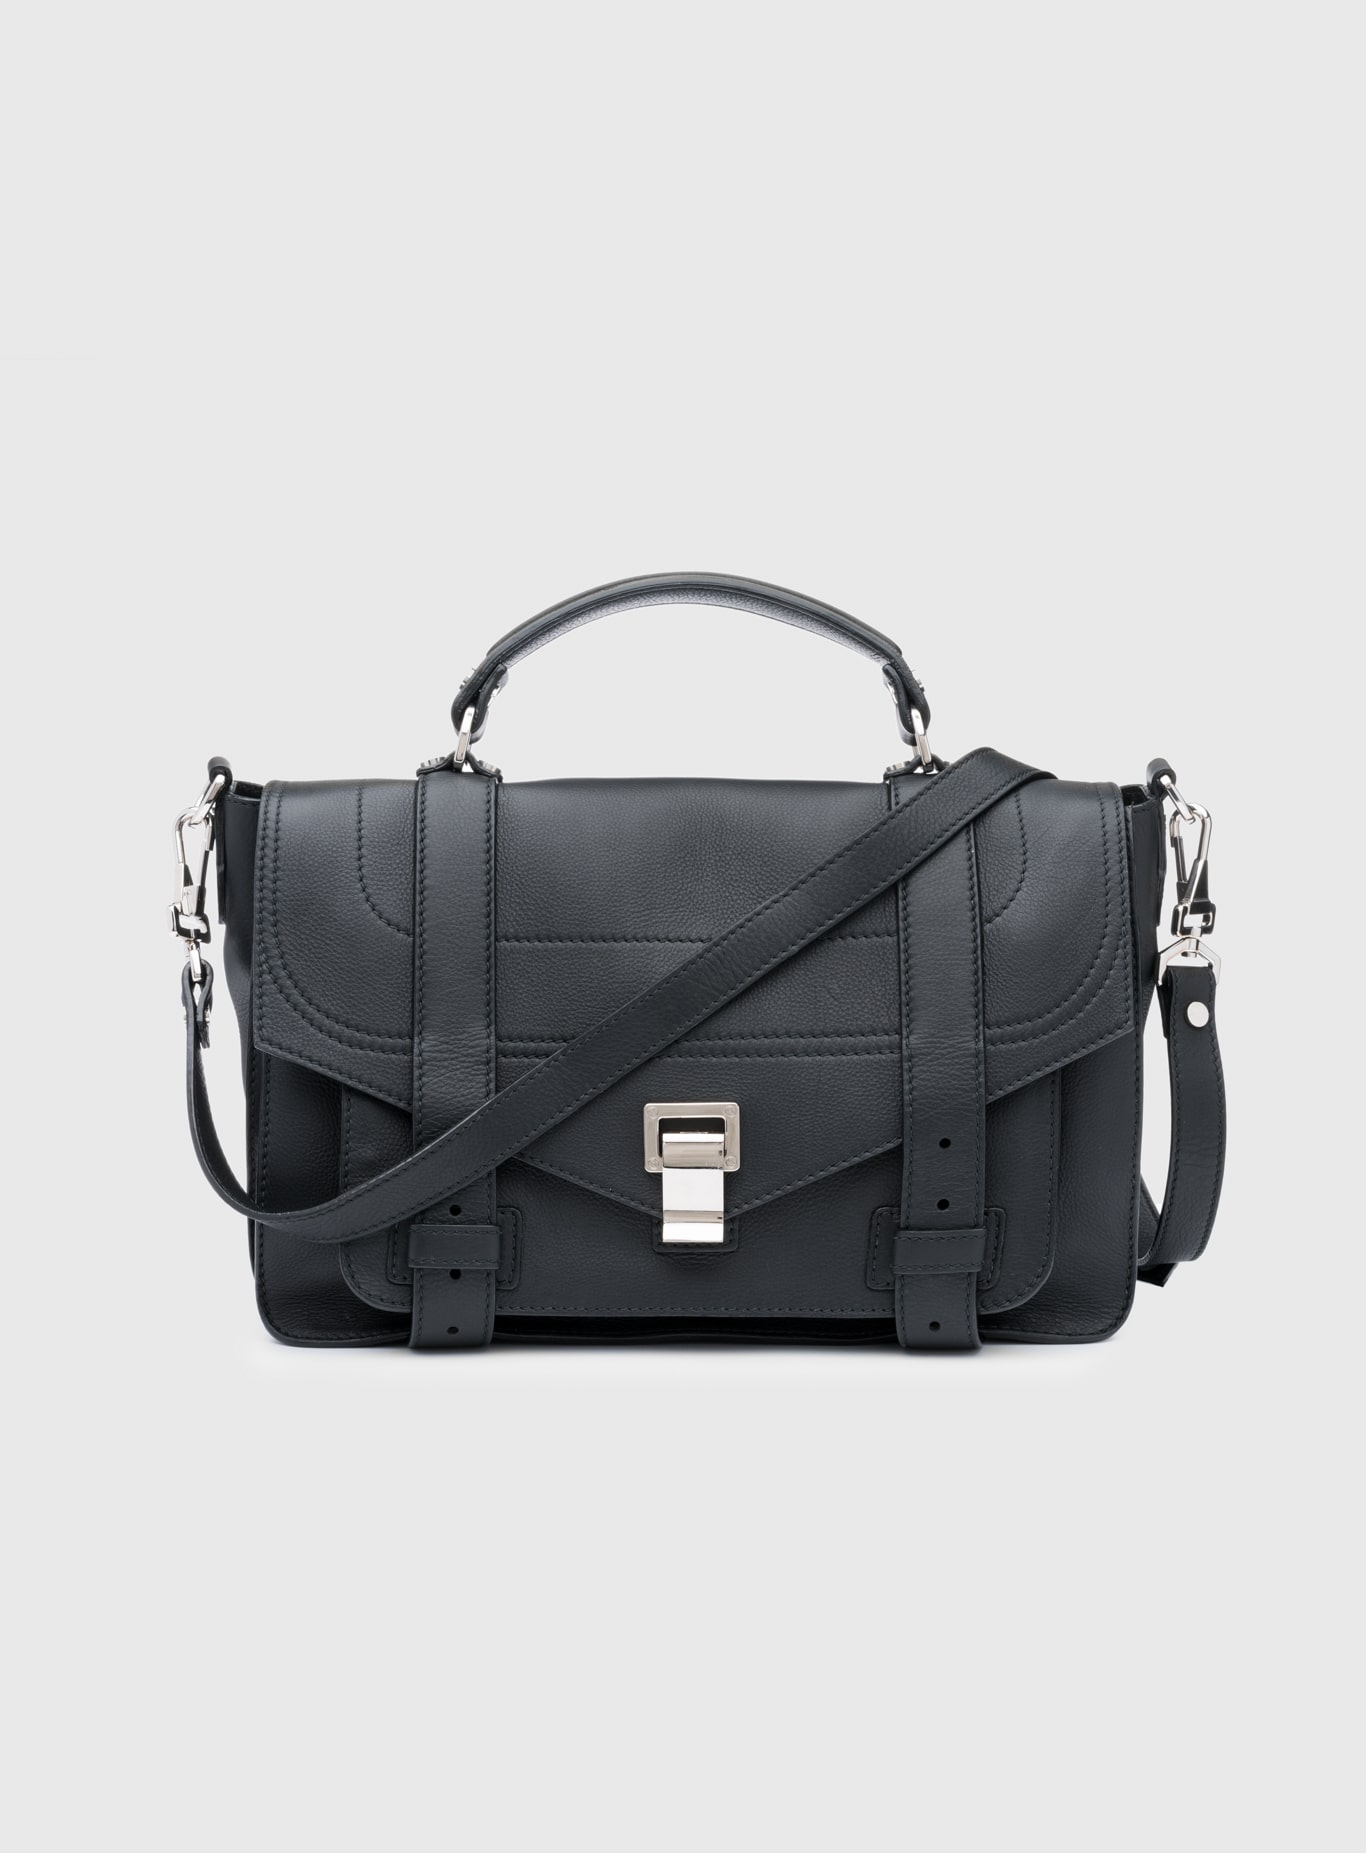 Proenza Schouler Introduces The New PS1+ Bag - Spotted Fashion